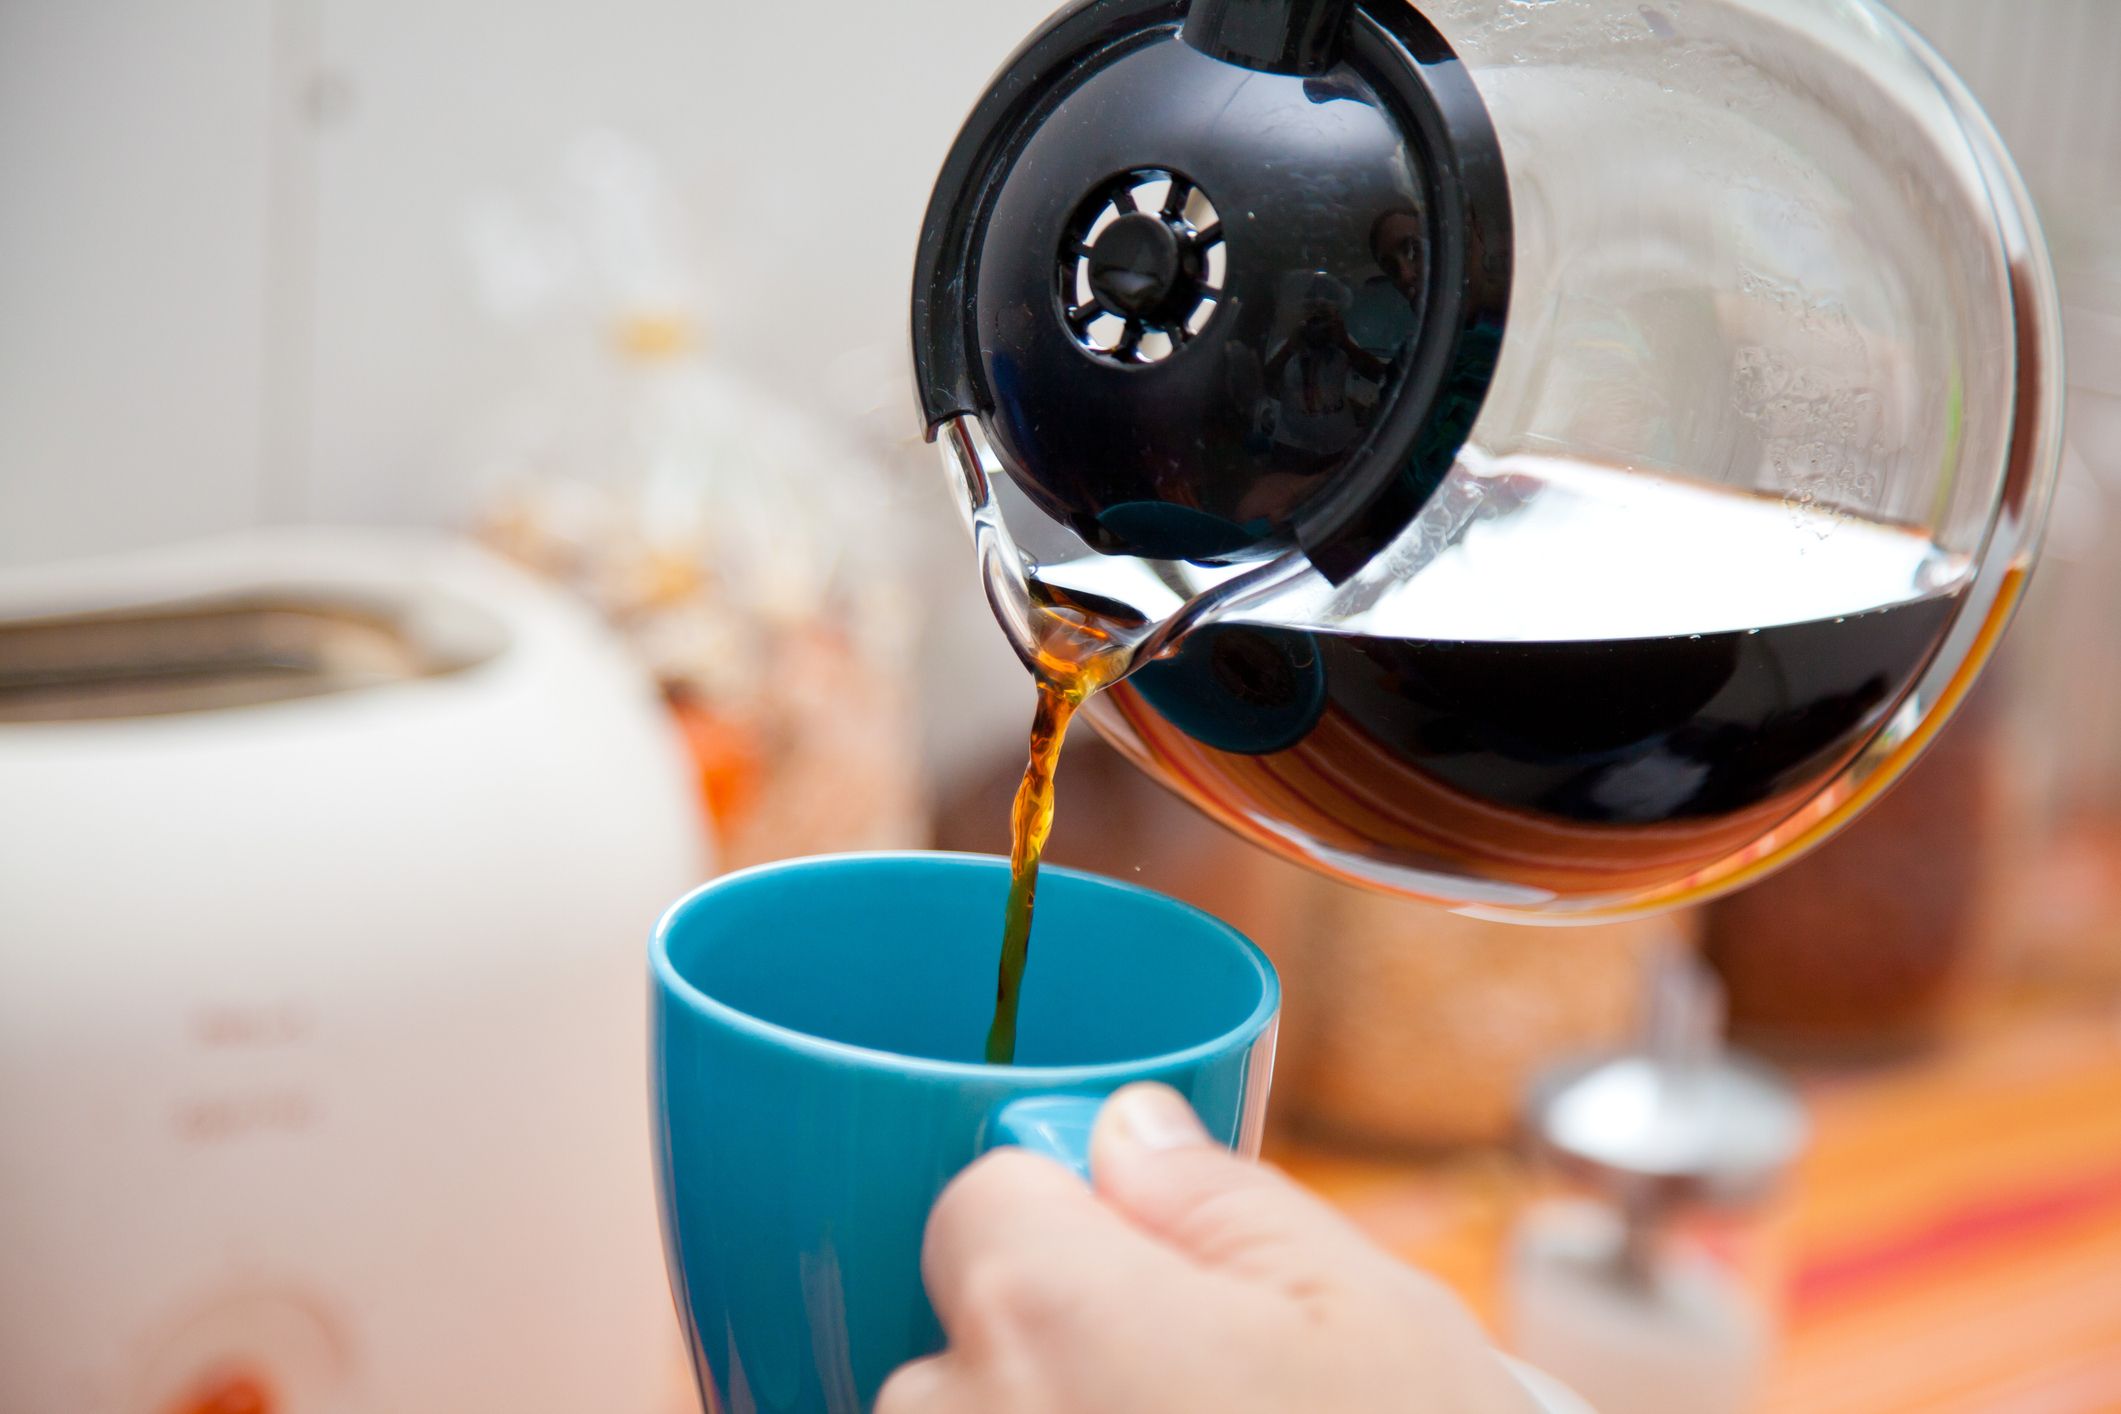 I test coffee makers for a living — here are 5 Black Friday deals I'd buy